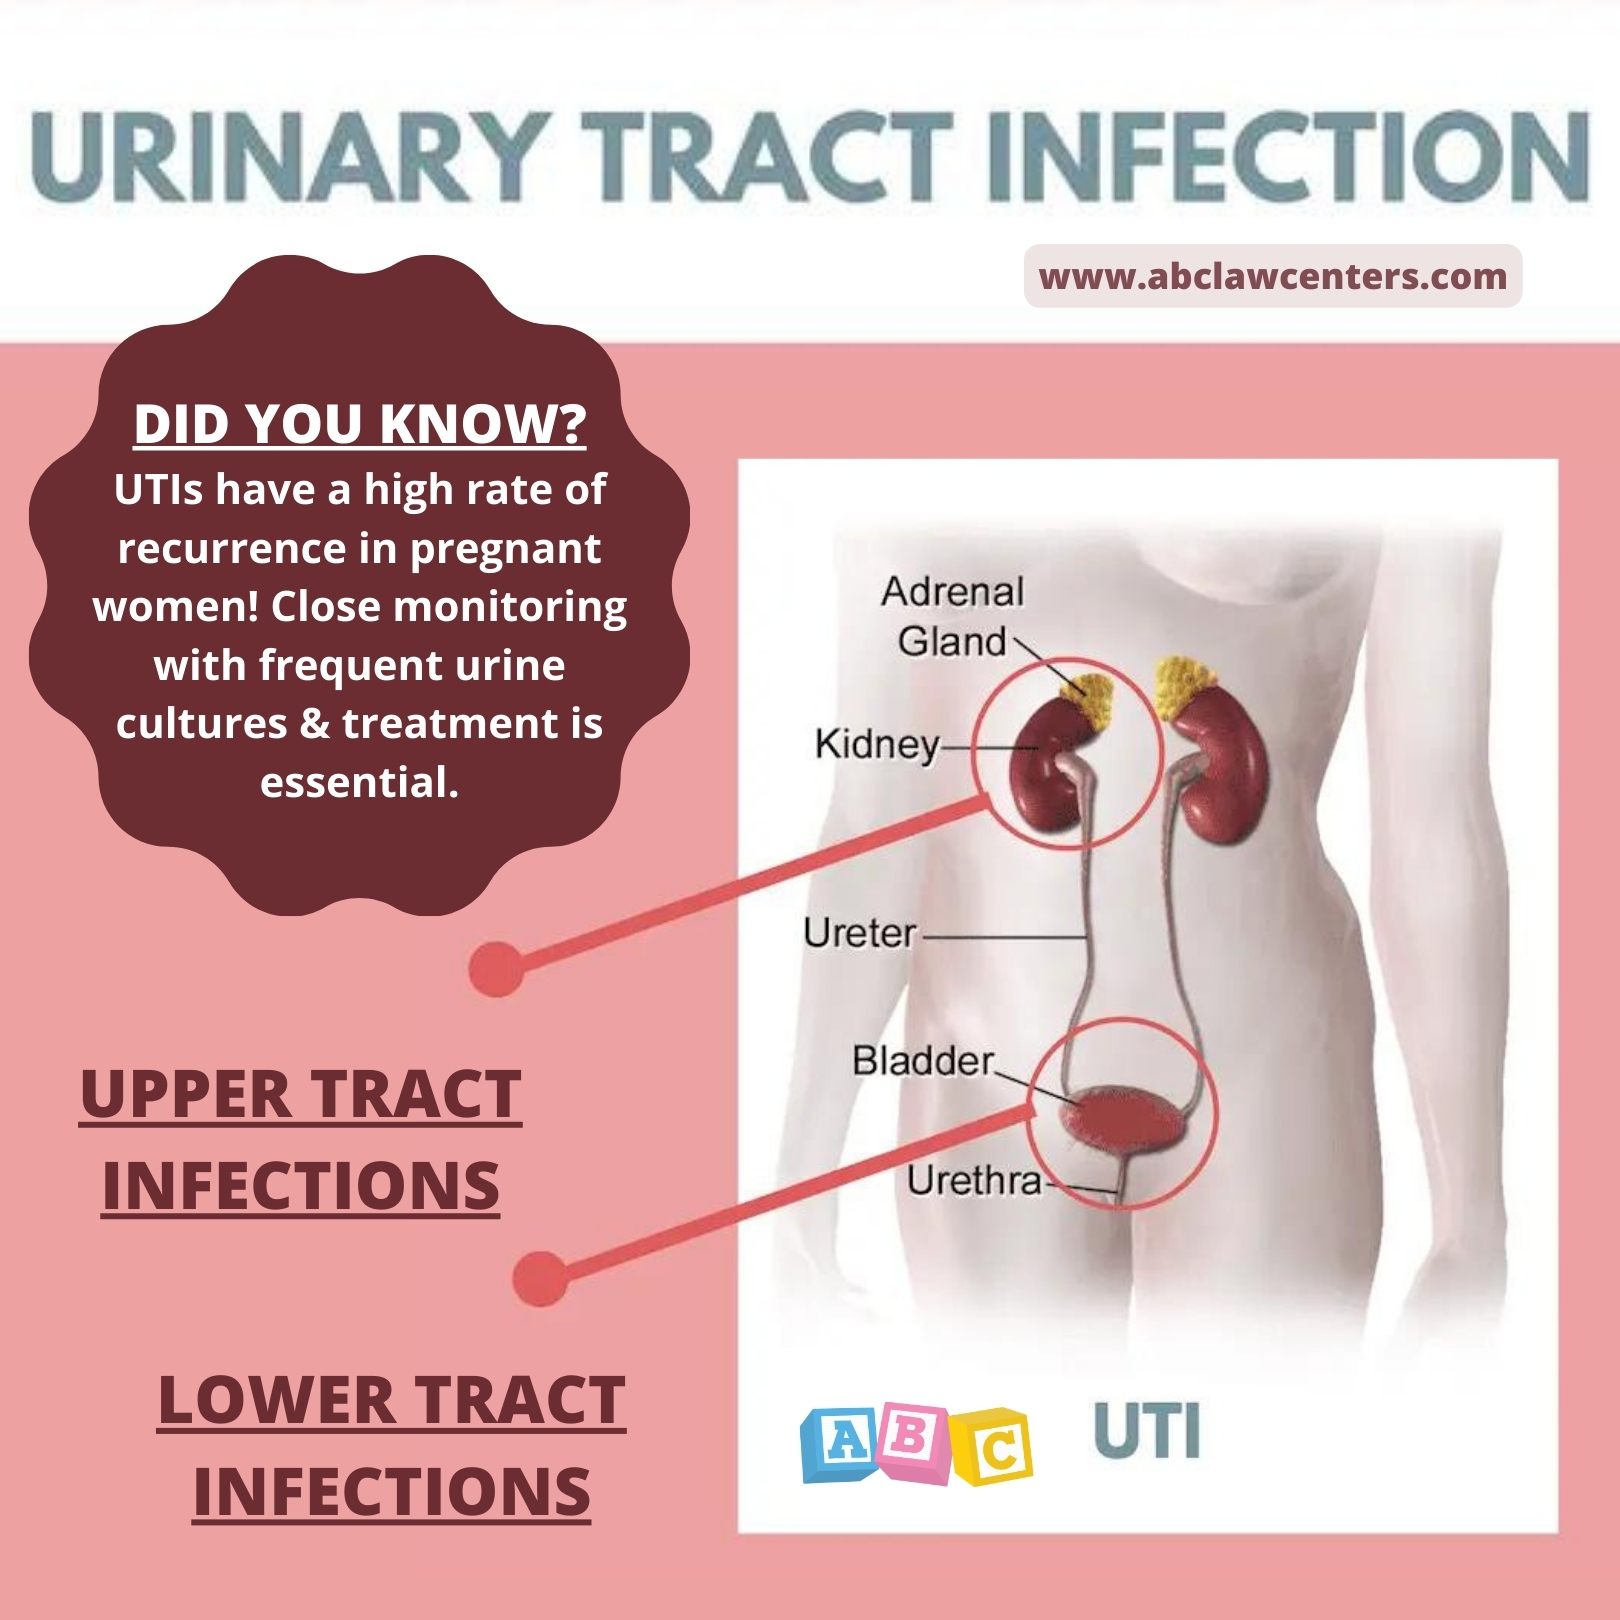 SIGNS YOU HAVE A UTI AND WHAT YOU SHOULD DO